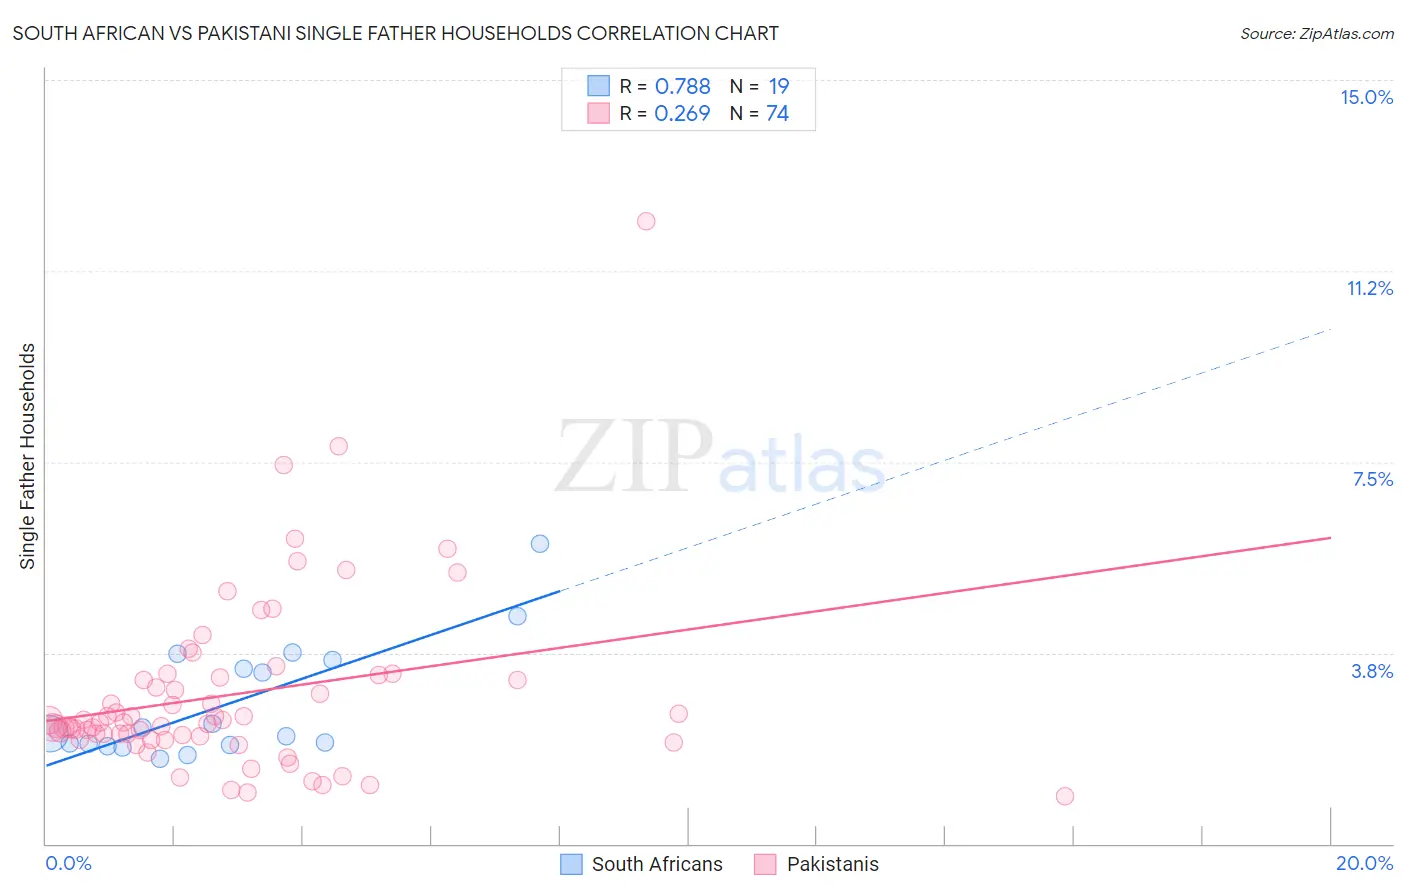 South African vs Pakistani Single Father Households